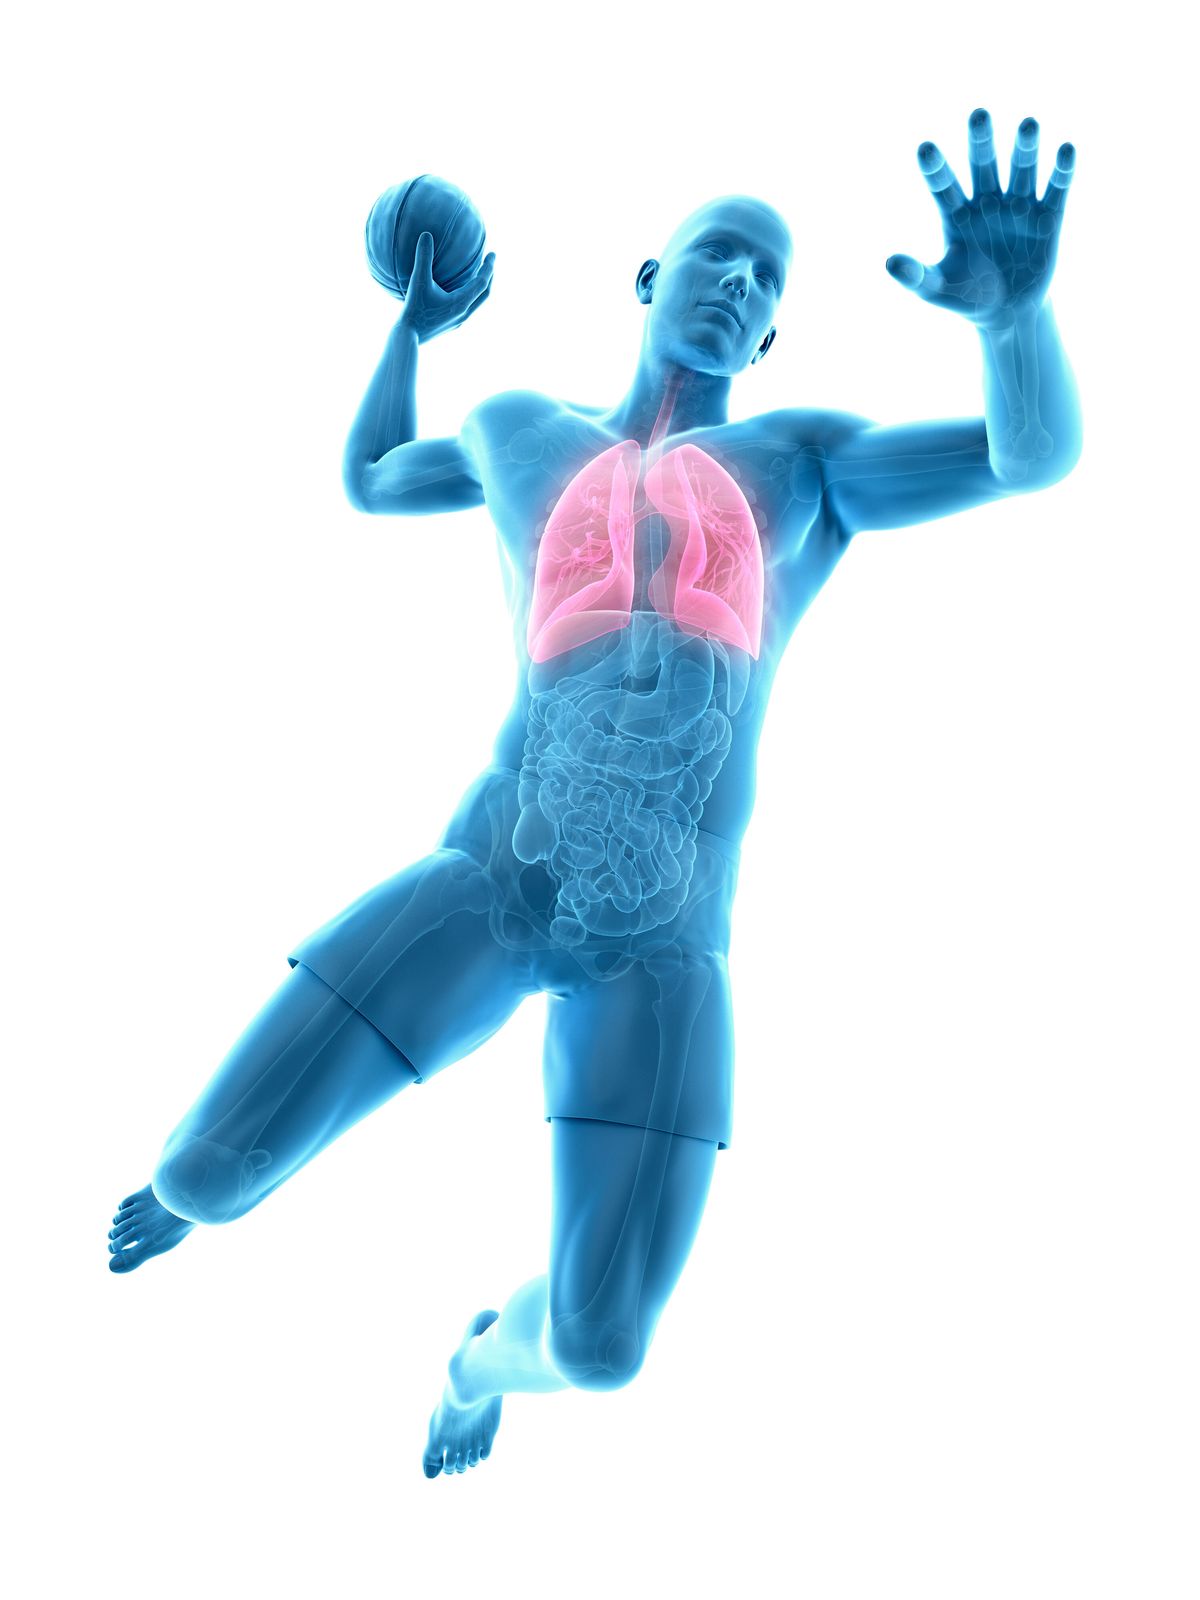 anatomical illustration of lungs in man playing basketball